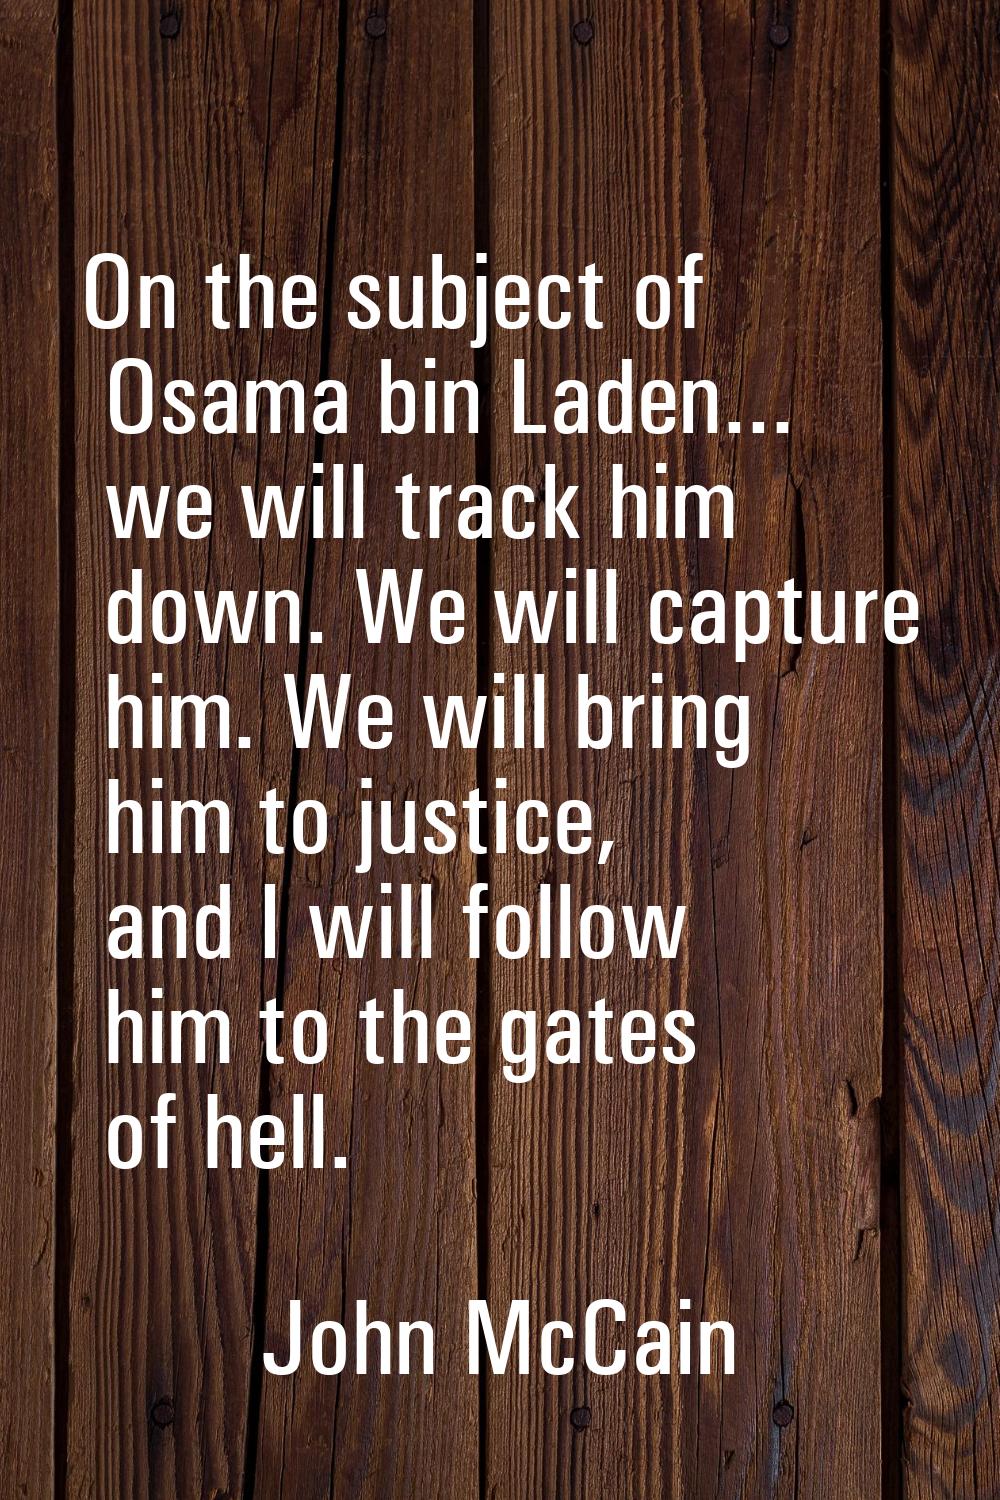 On the subject of Osama bin Laden... we will track him down. We will capture him. We will bring him